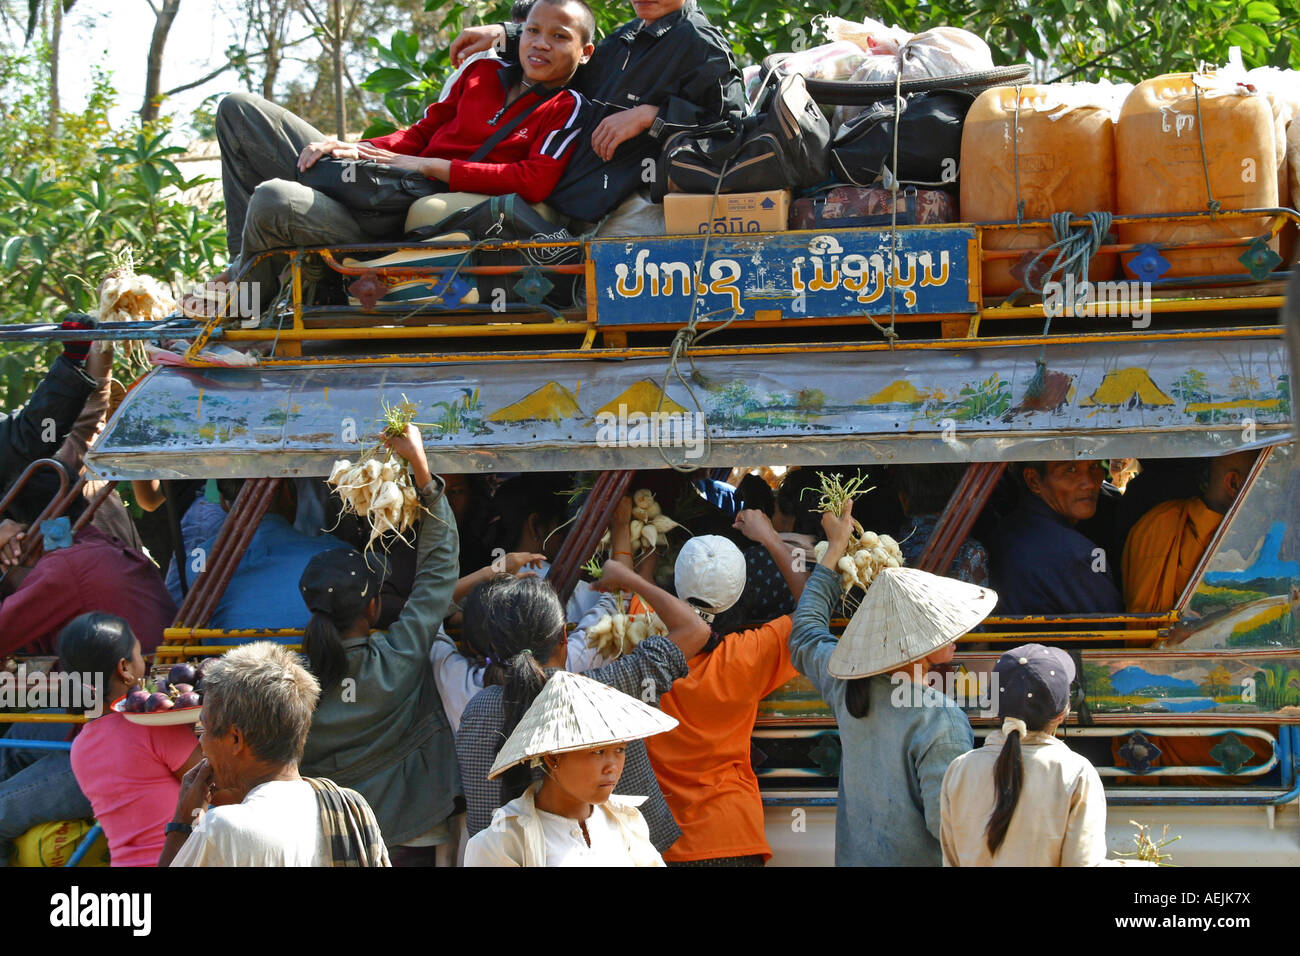 Vendors wait for customers at the busstop, Laos Stock Photo